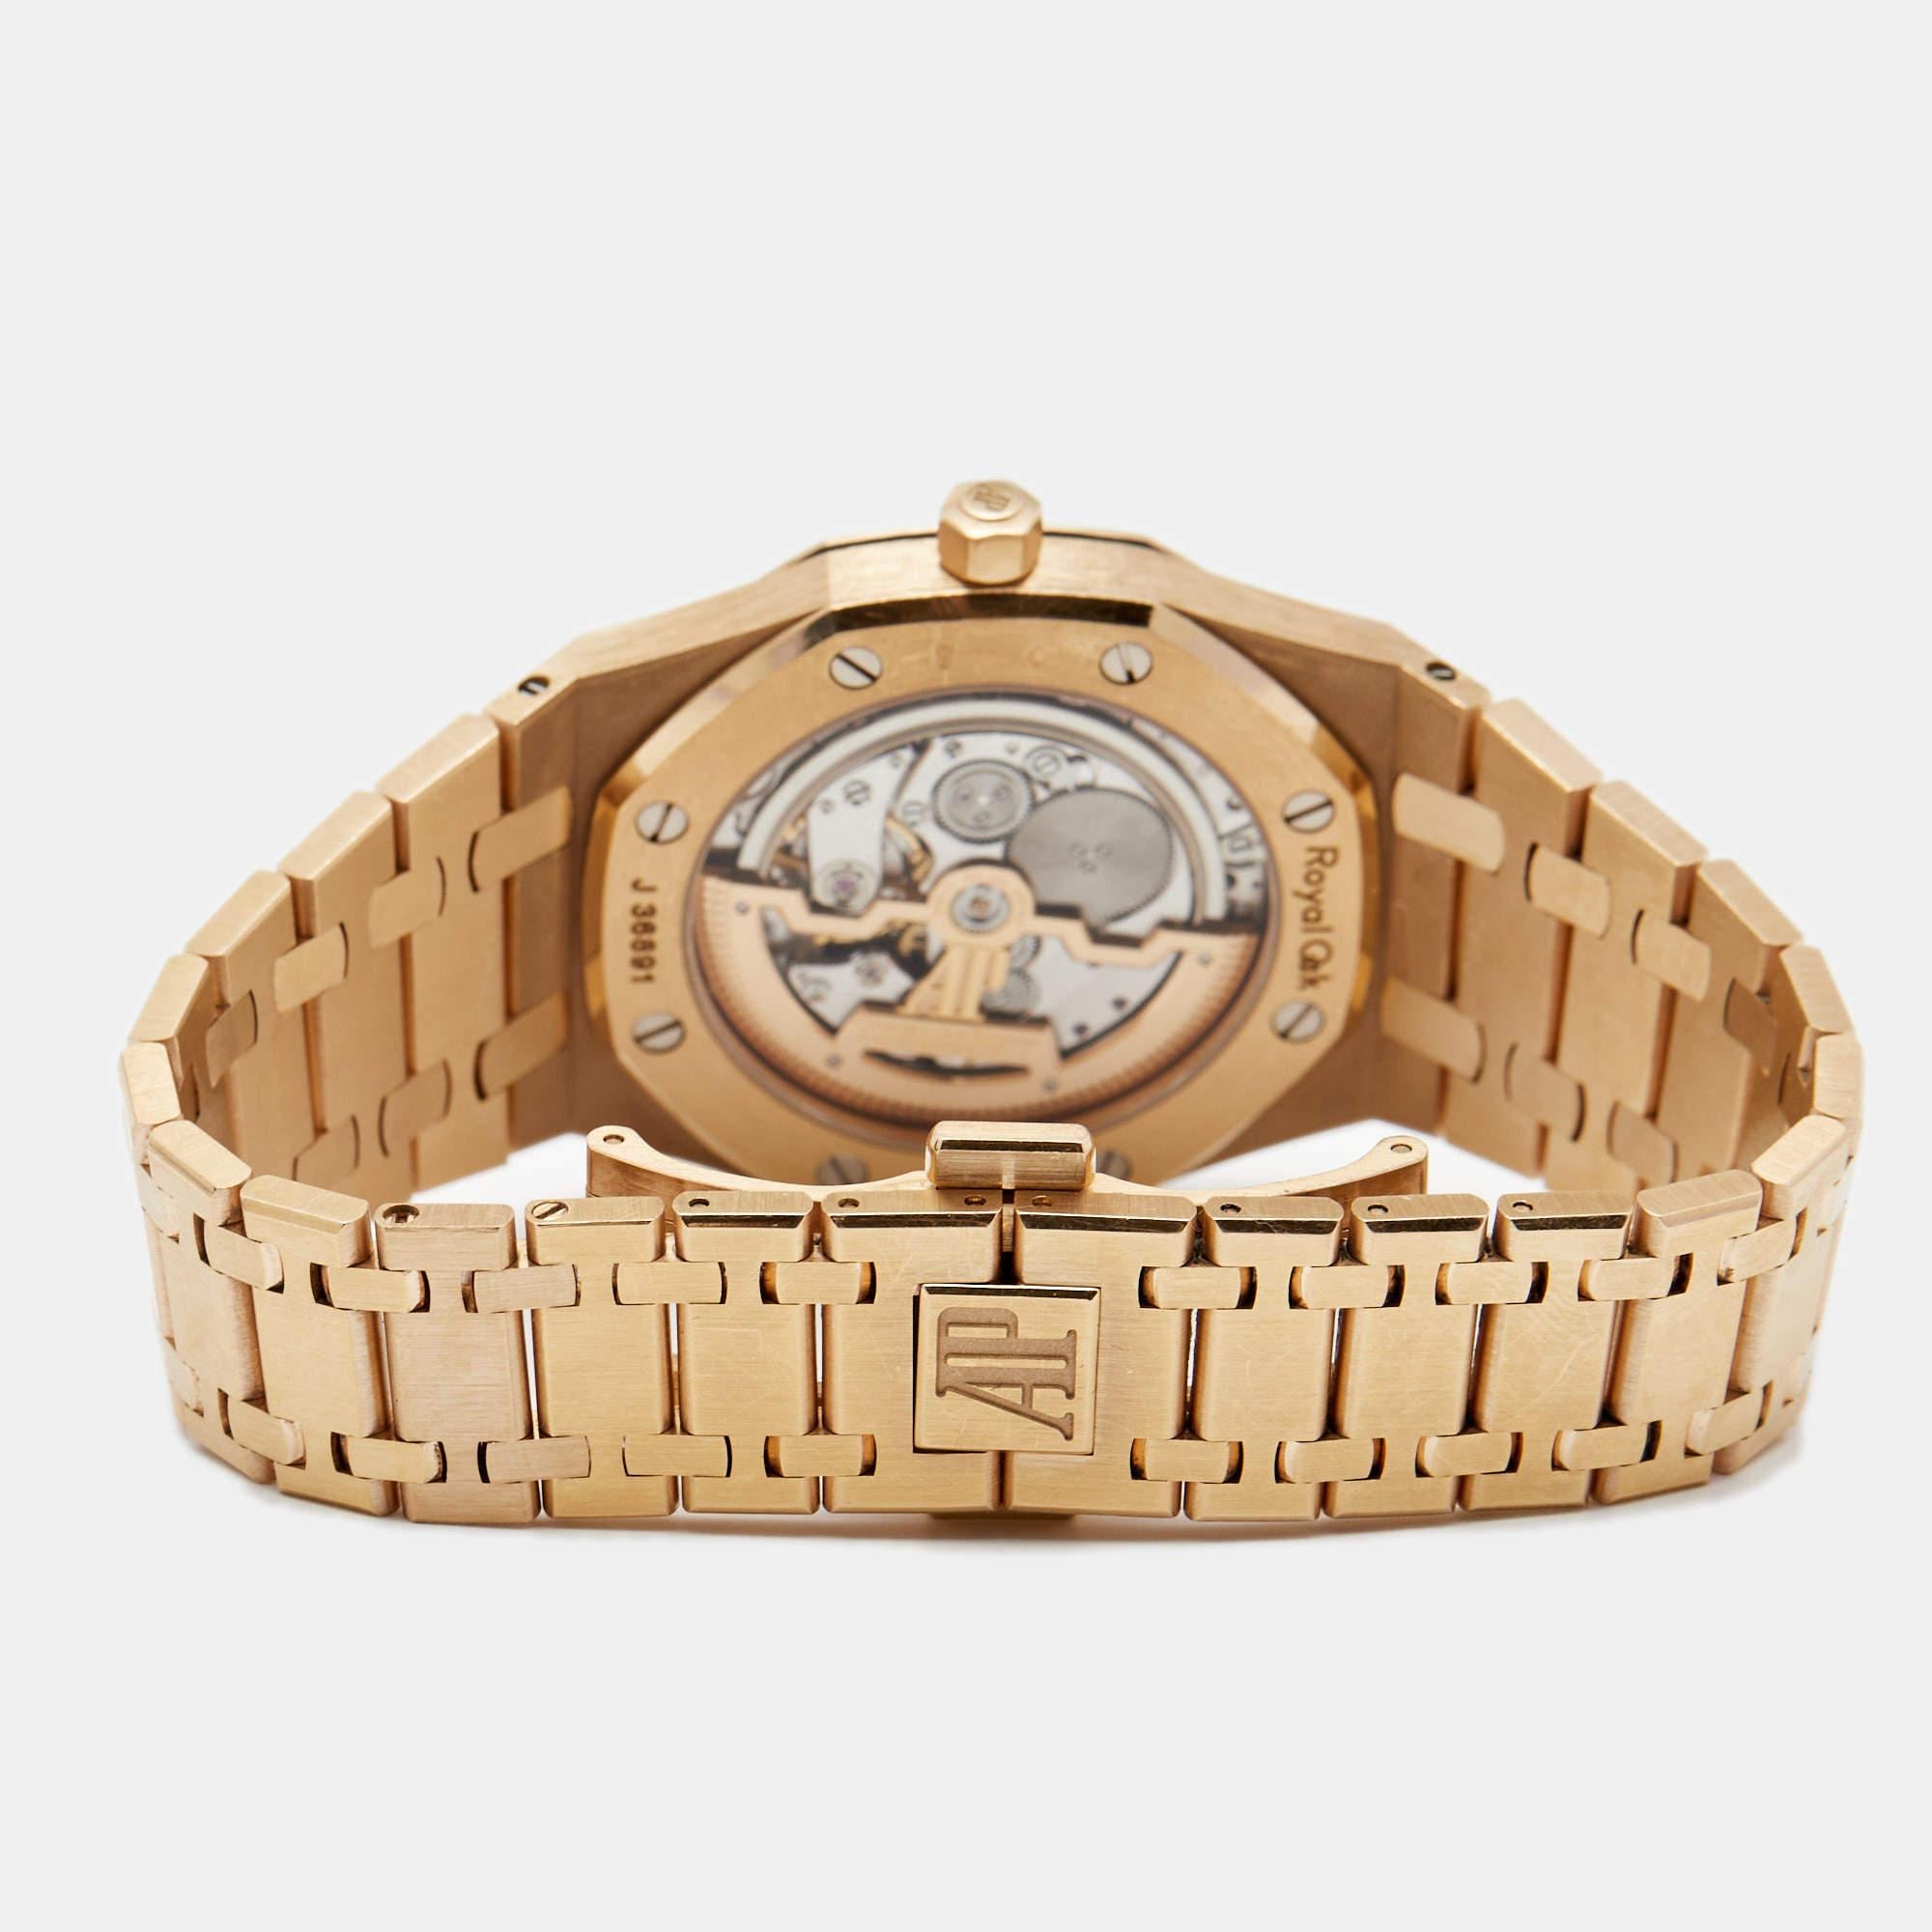 Created in 1972, the Audemars Piguet Royal Oak is a watch that has inspired generations of watchmakers and luxury watch collectors. Recognizable at first glance, the Royal Oak is a creation like no other. It is a timepiece one would treasure for